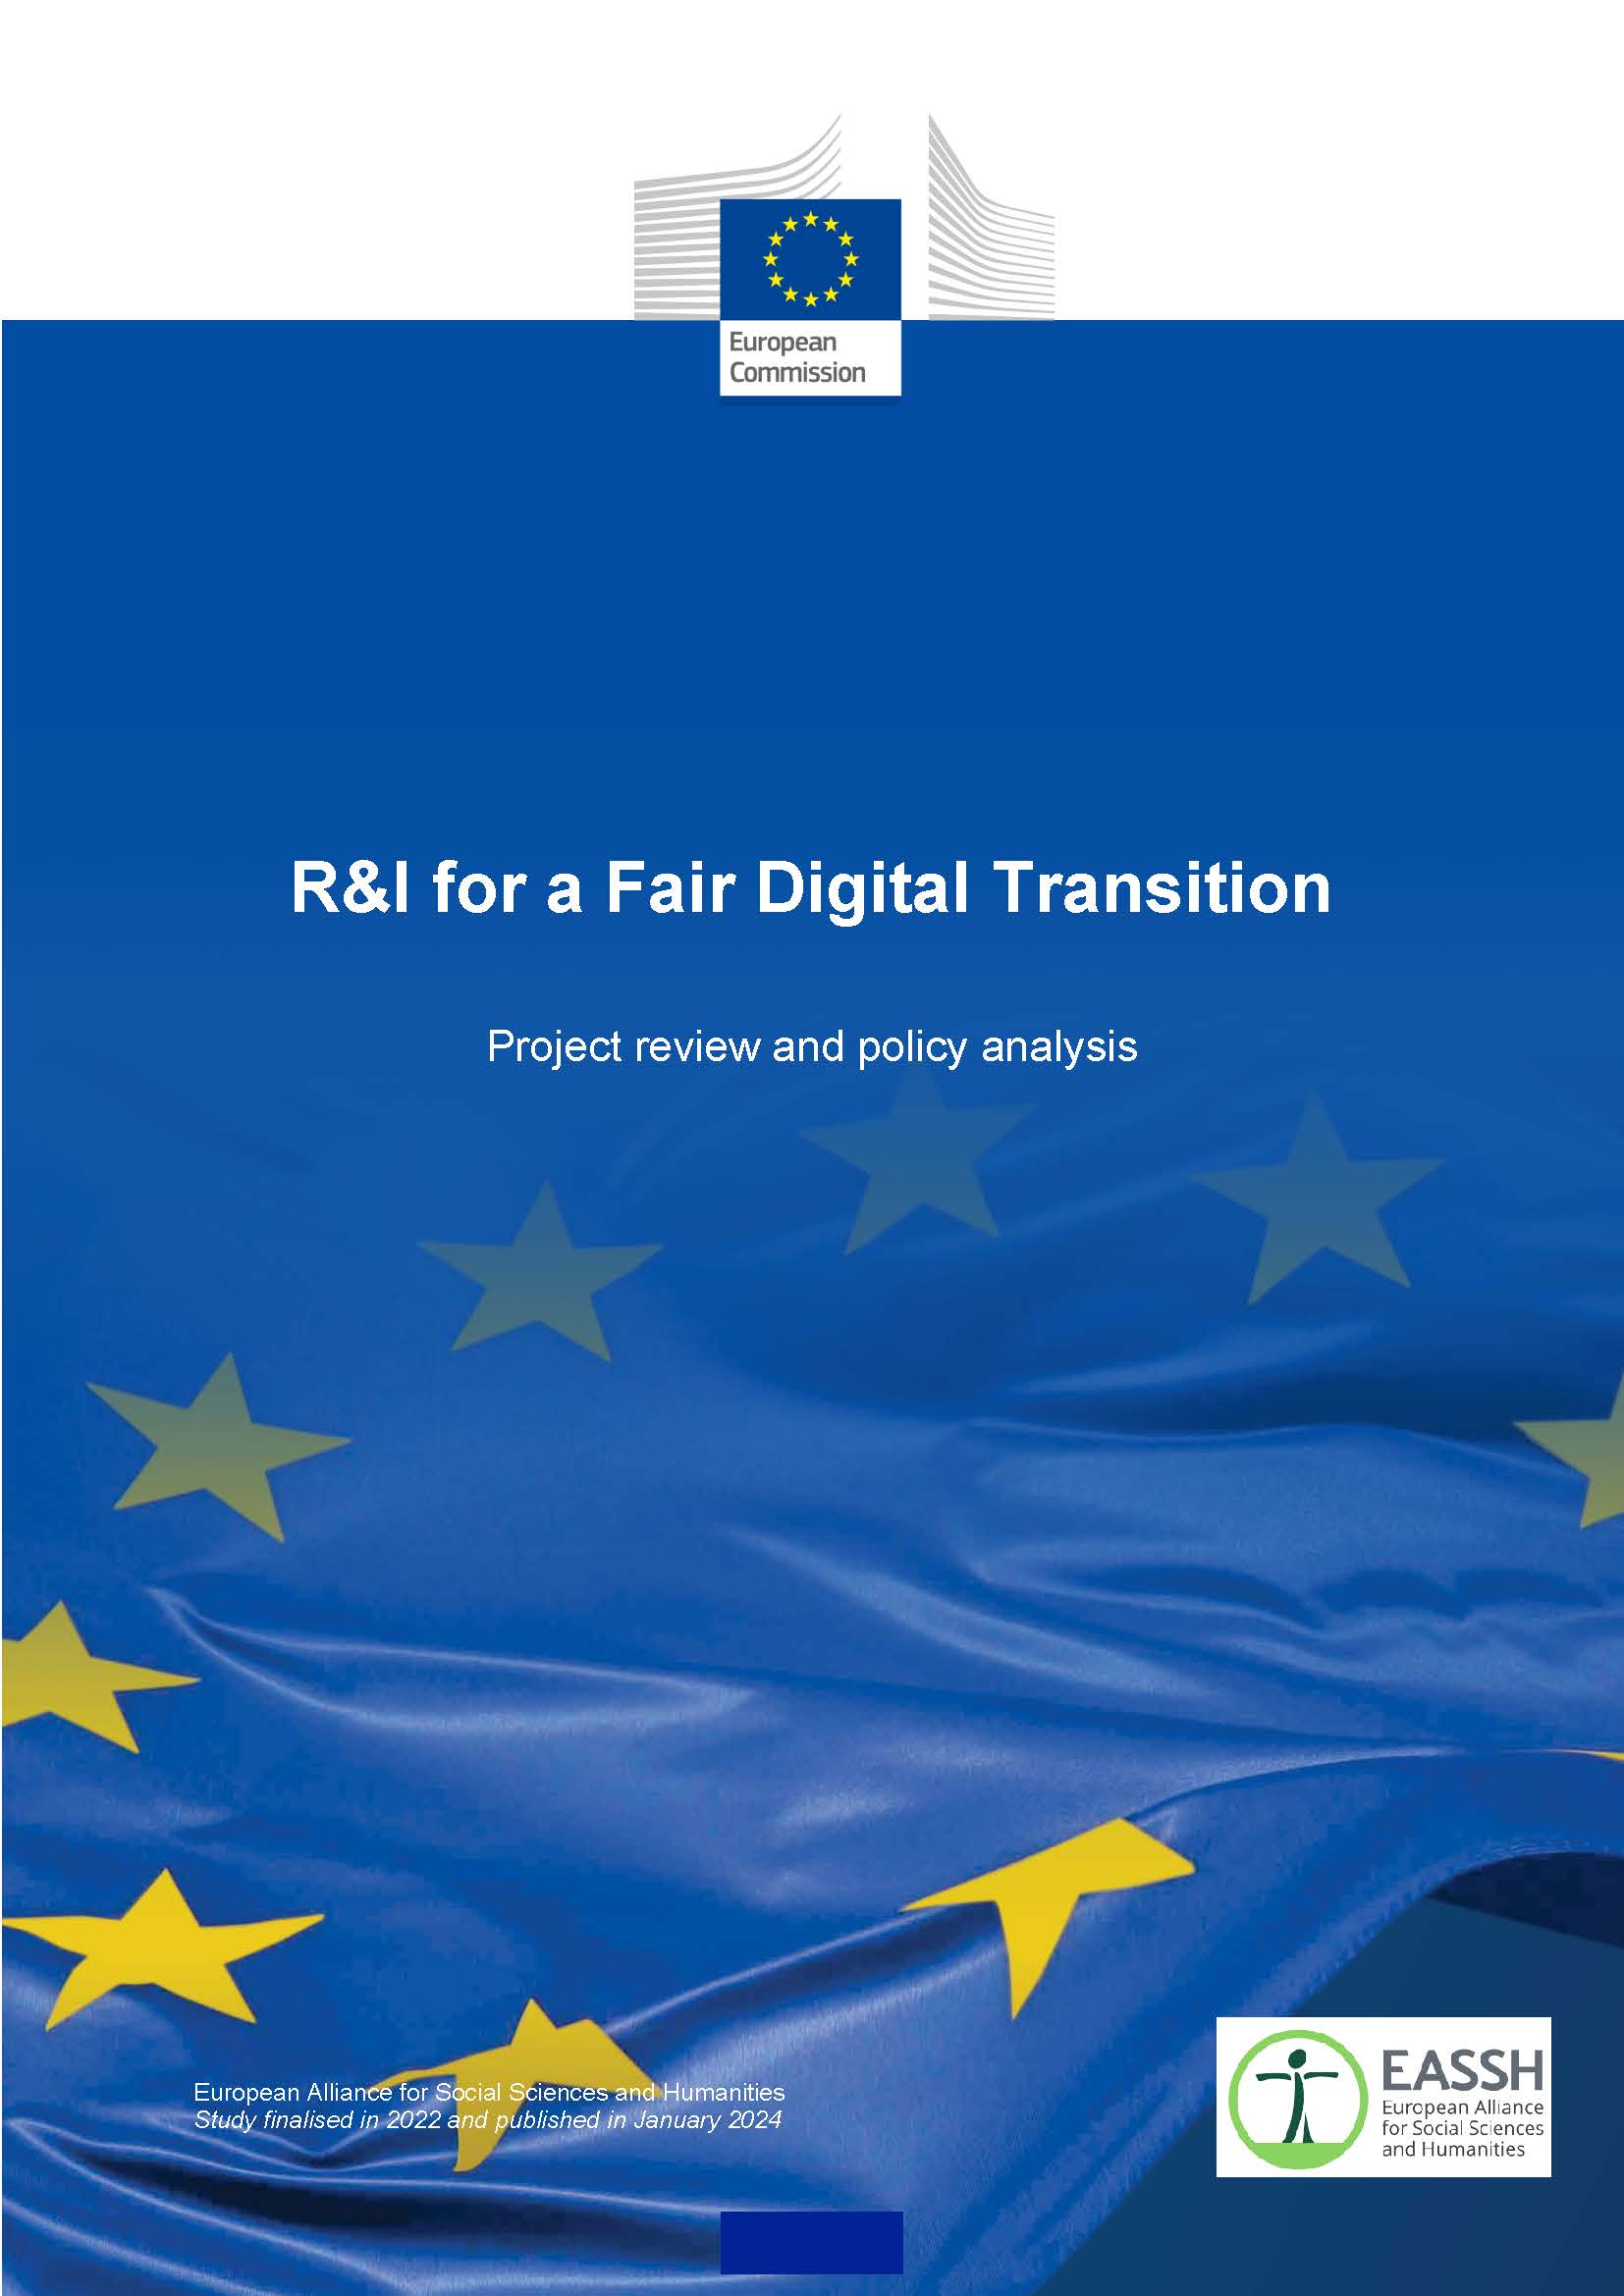 R&I for a Fair Digital Transition: Project review and policy analysis
